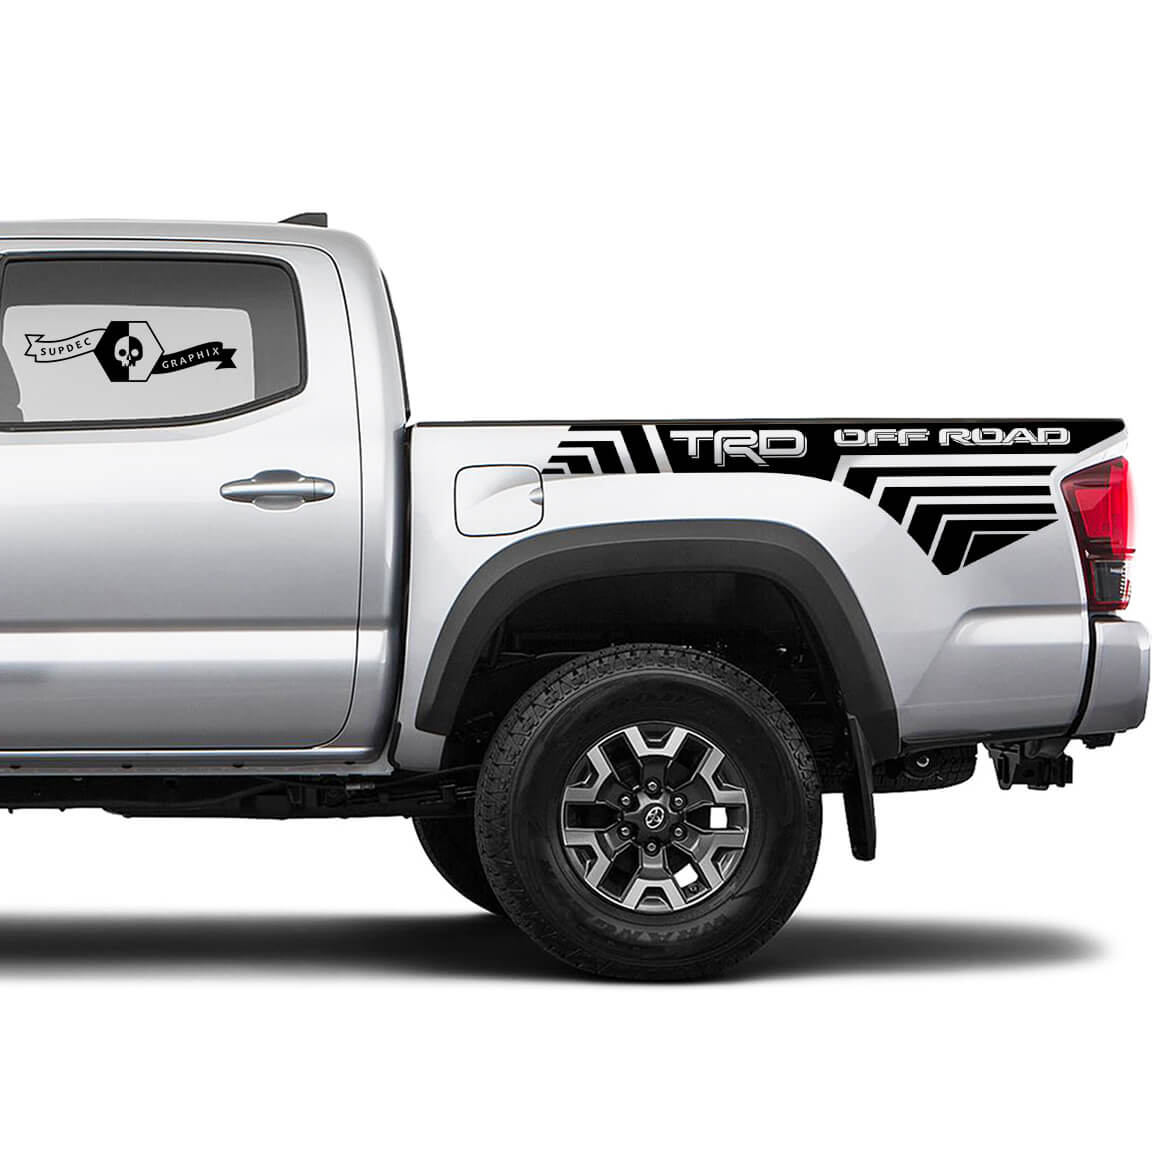 TRD 4x4 Off-Road Lines BedSide Side Vinyl Stickers Decal fit to Toyota Tacoma Tundra all years